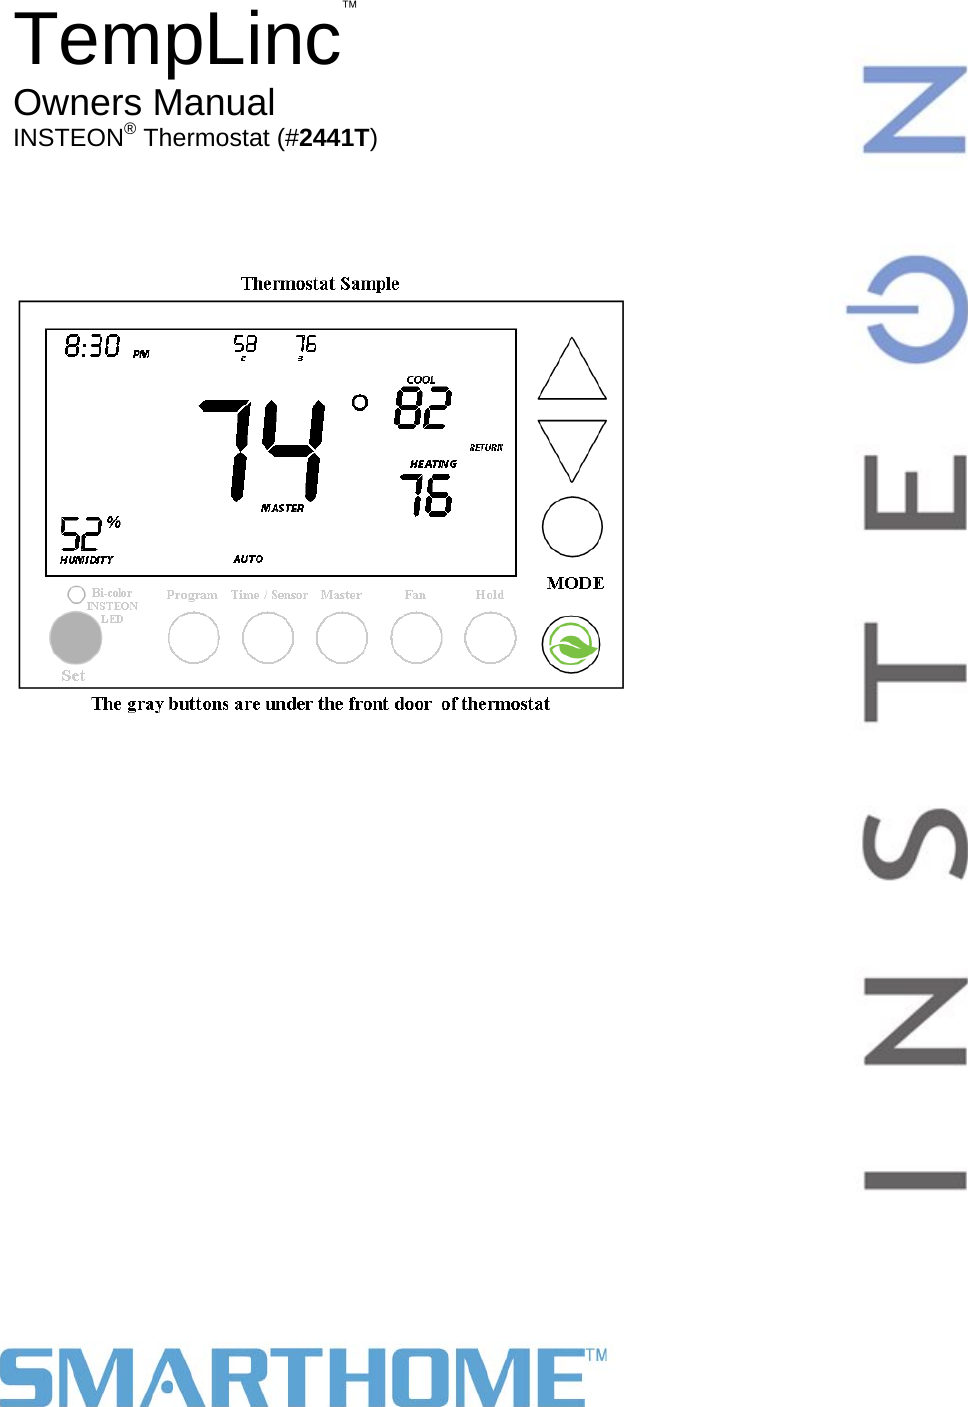                                                                                                                                   Page 1 of 22                                                                                         Rev: 9/30/2011 1:26 PM   TempLinc Owners Manual INSTEON® Thermostat (#2441T)       